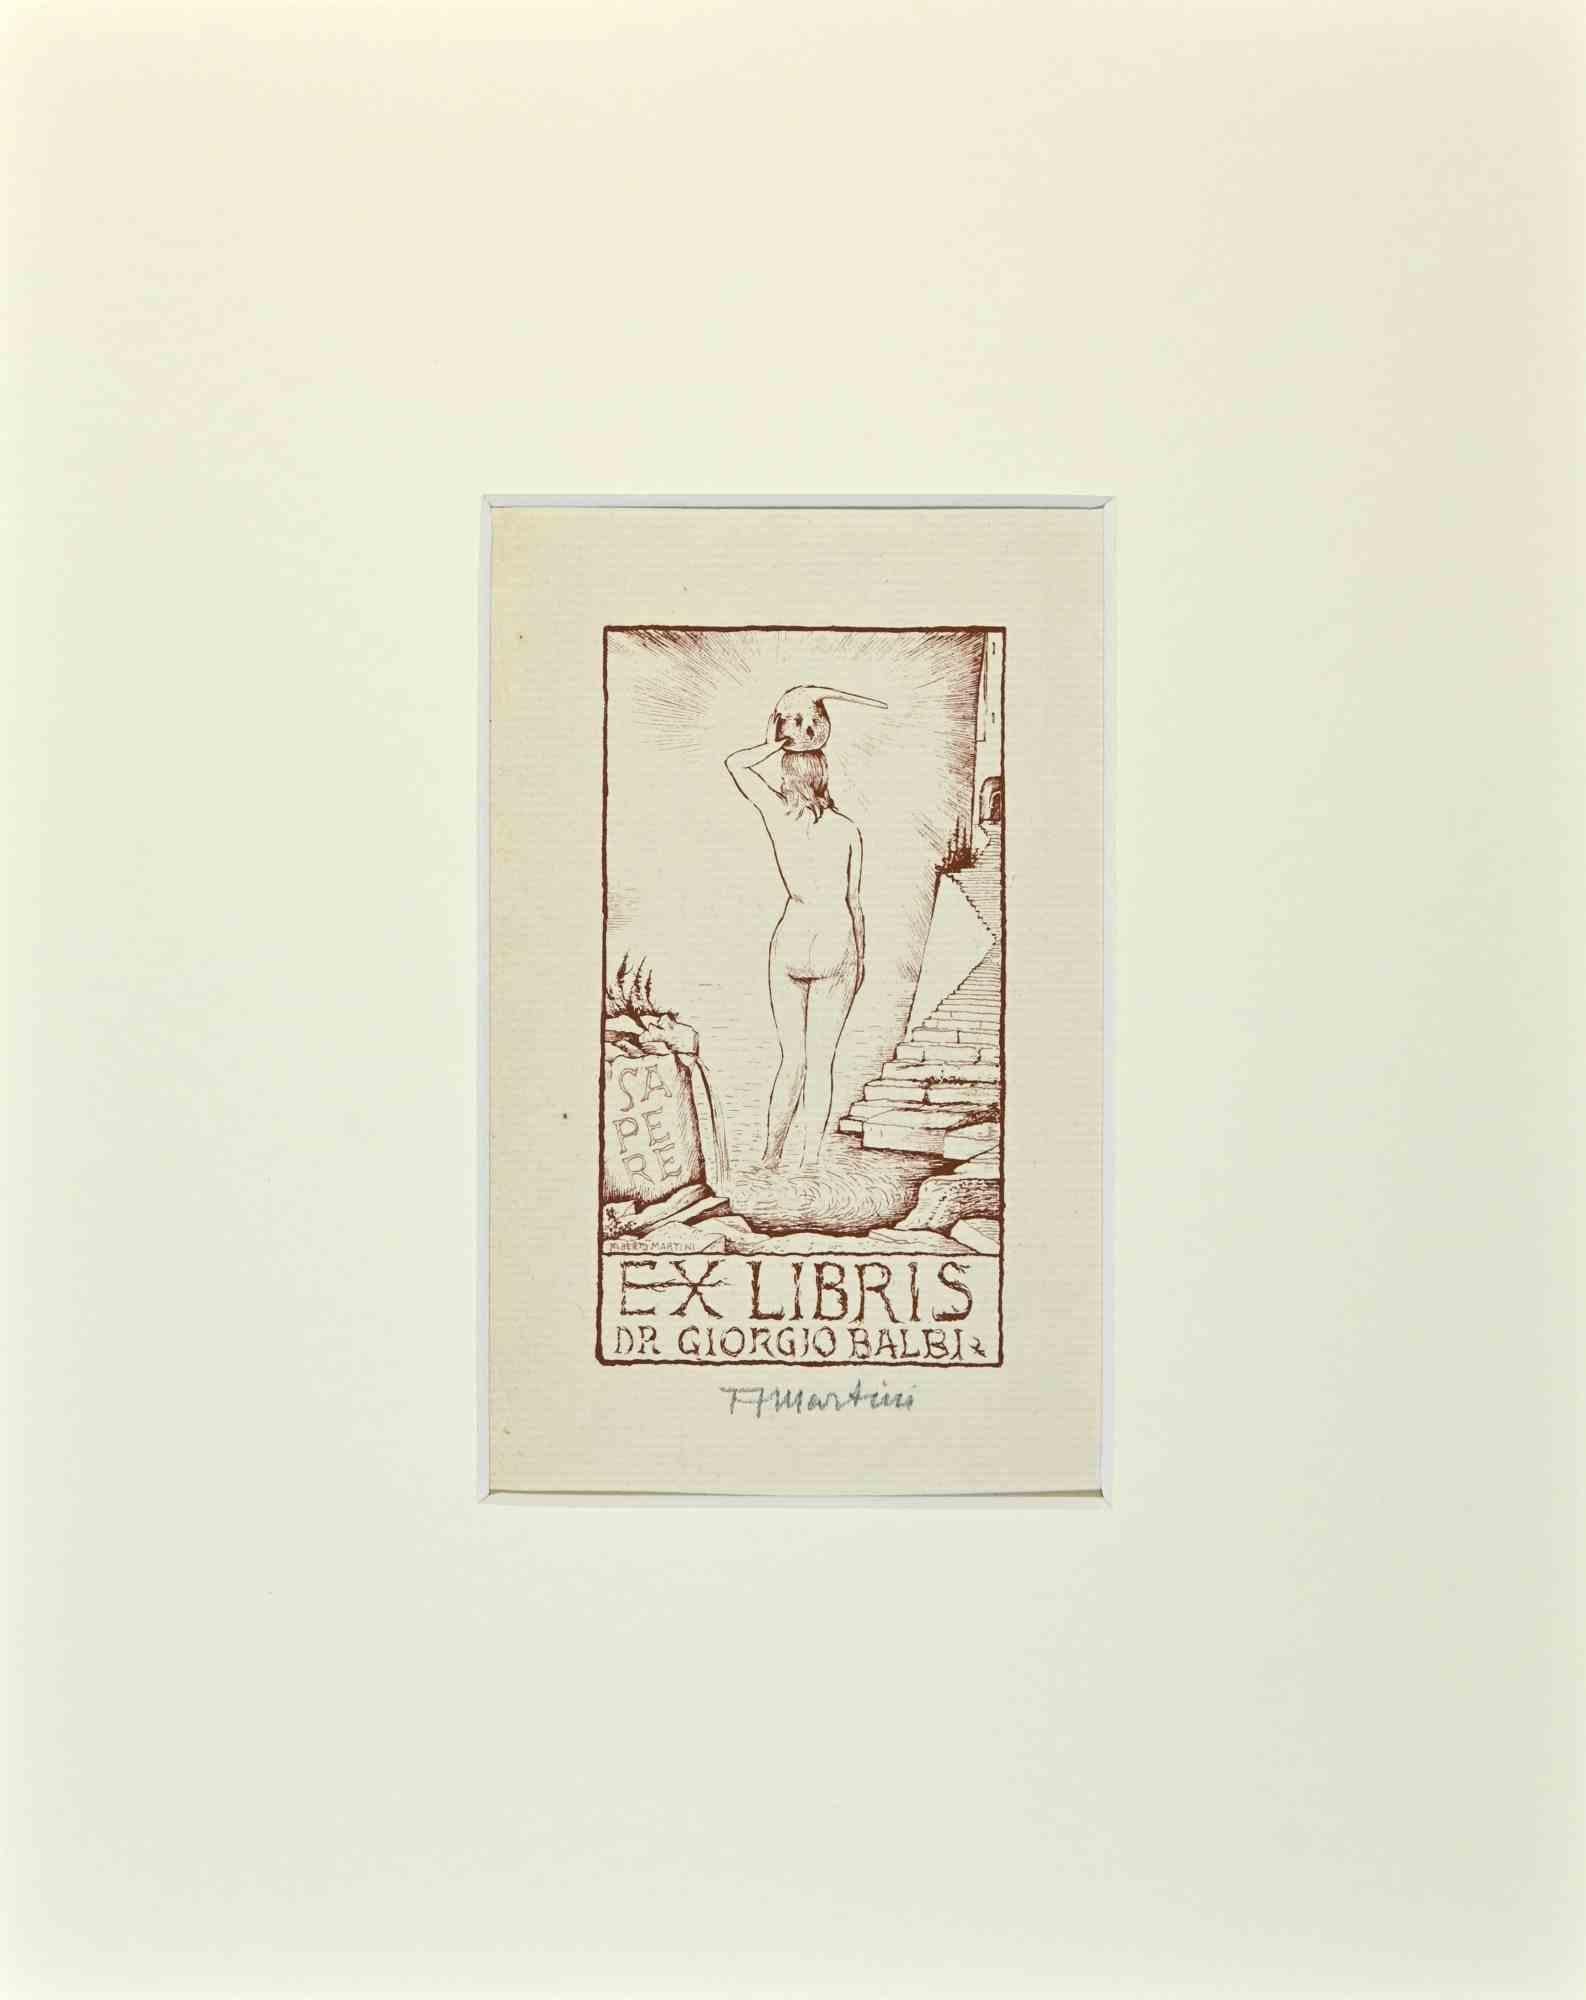 Ex Libris  - Giorgio Balbi is an Artwork realized by Alberto Martini in Mid 20th Century.

Etching. Hand signed.

Good conditions.